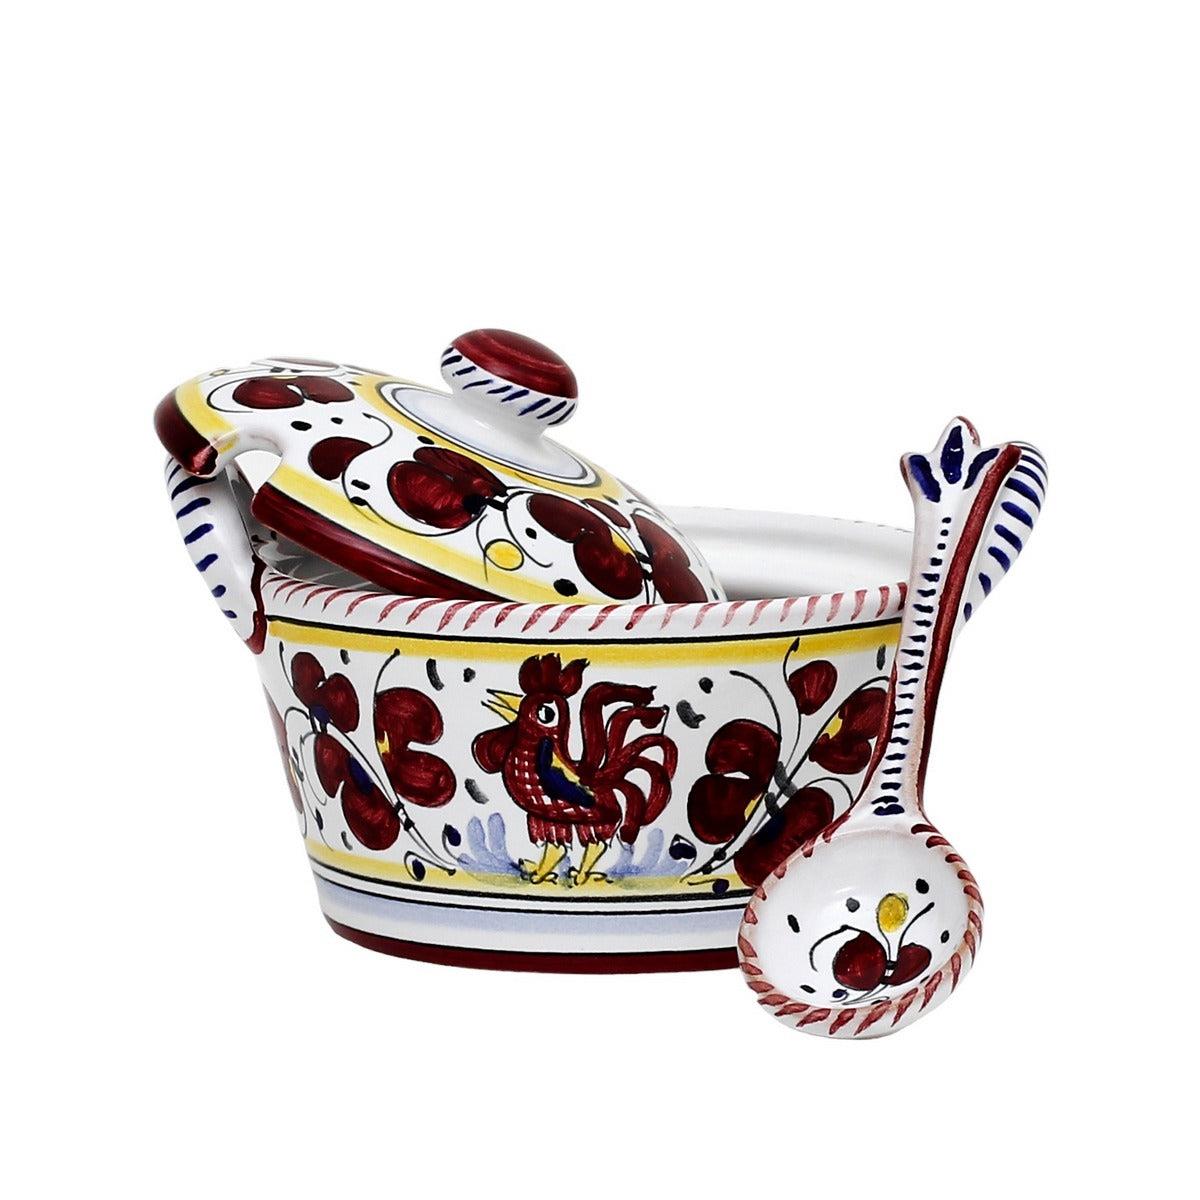 Bowl With Spoon ORVIETO ROOSTER Deruta Majolica Red Ceramic Handmade Dishwasher-Image 2